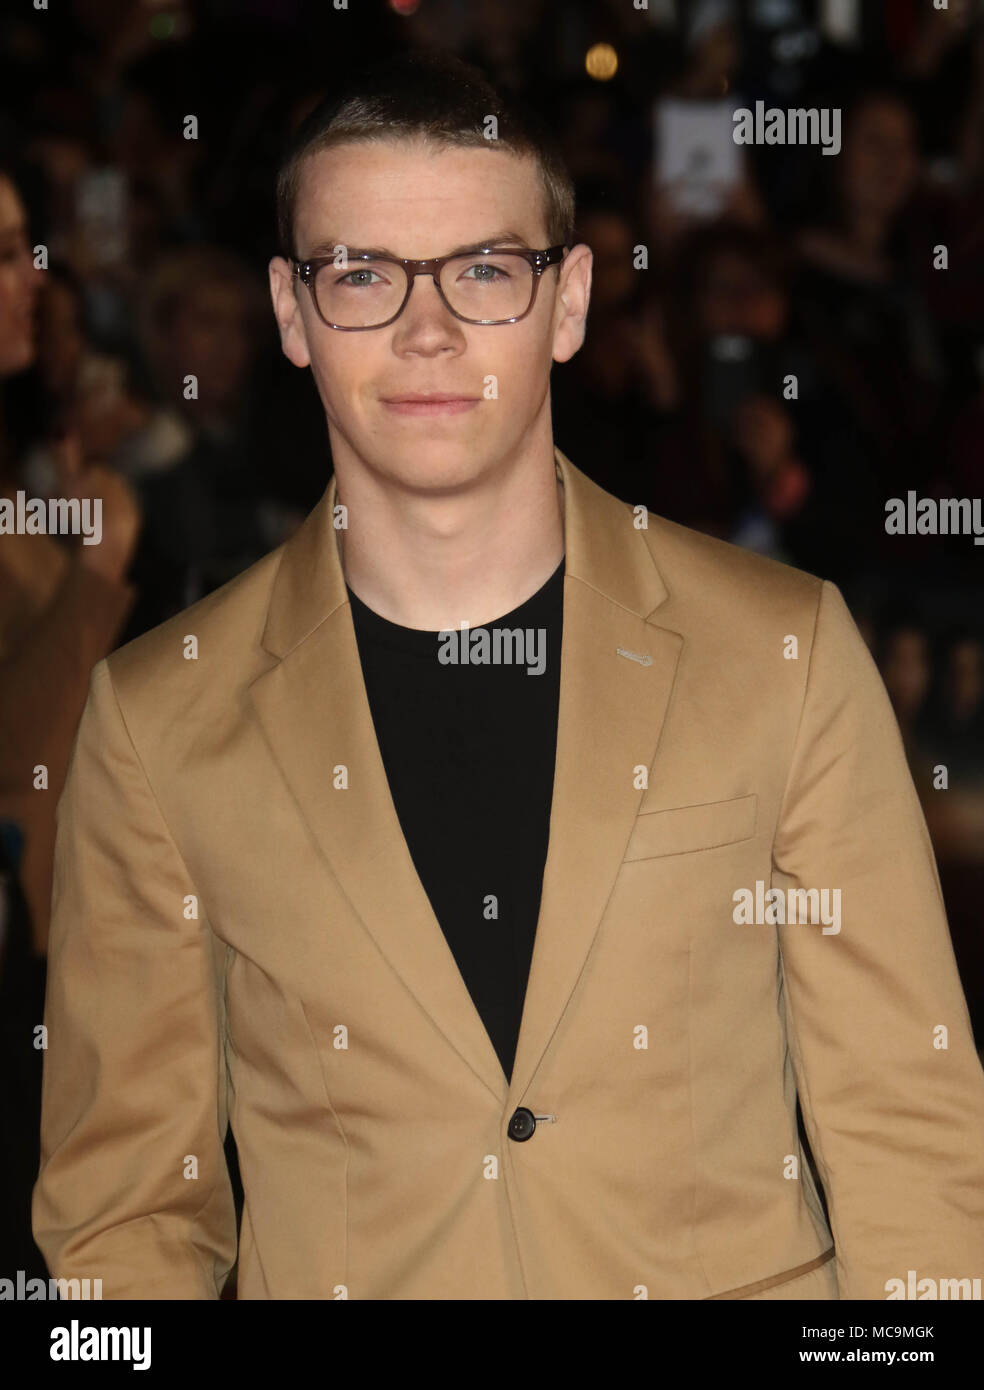 Jan 22, 2018 - Will Poulter attending The UK Fan Screening of 'Maze Runner: The Death Cure' at Vue Leicester Square in London, England, UK Stock Photo